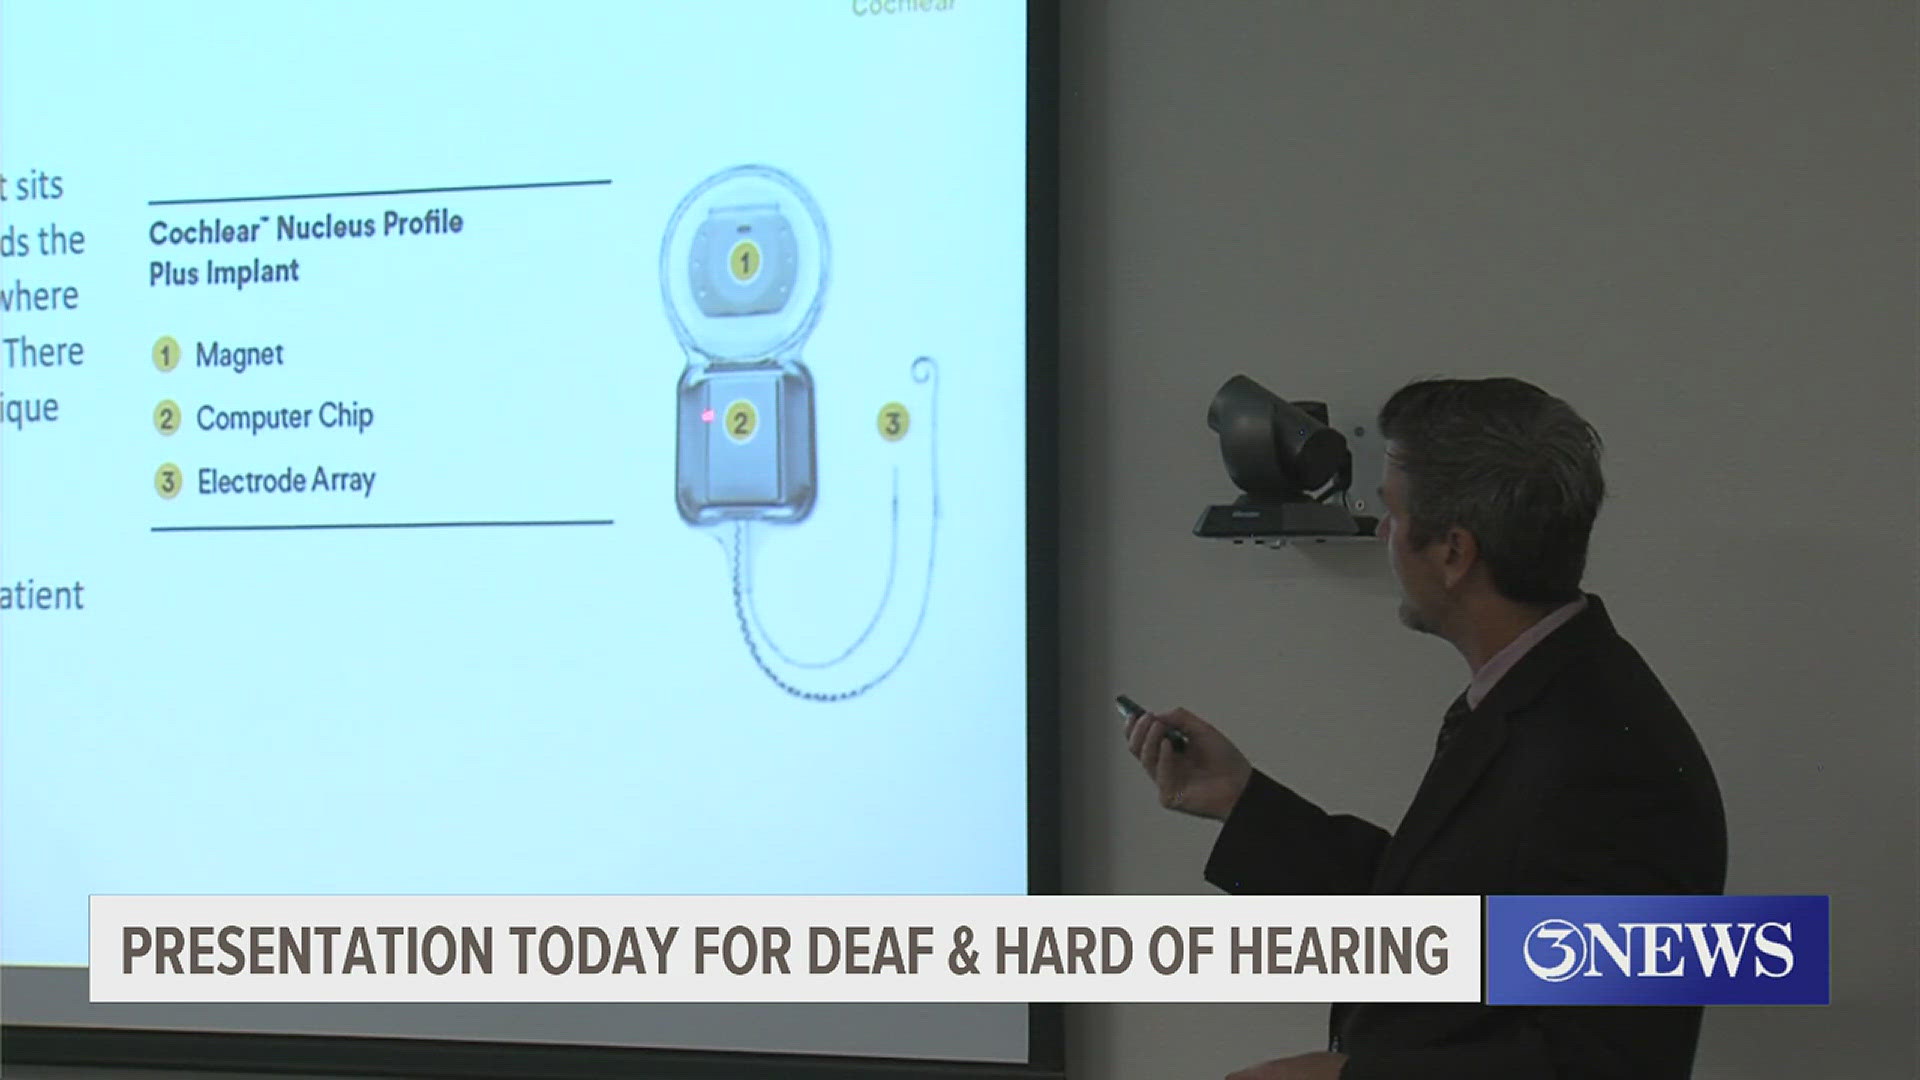 By 2030 experts expect more than half of those over the age of 65 will have some degree of hearing loss.